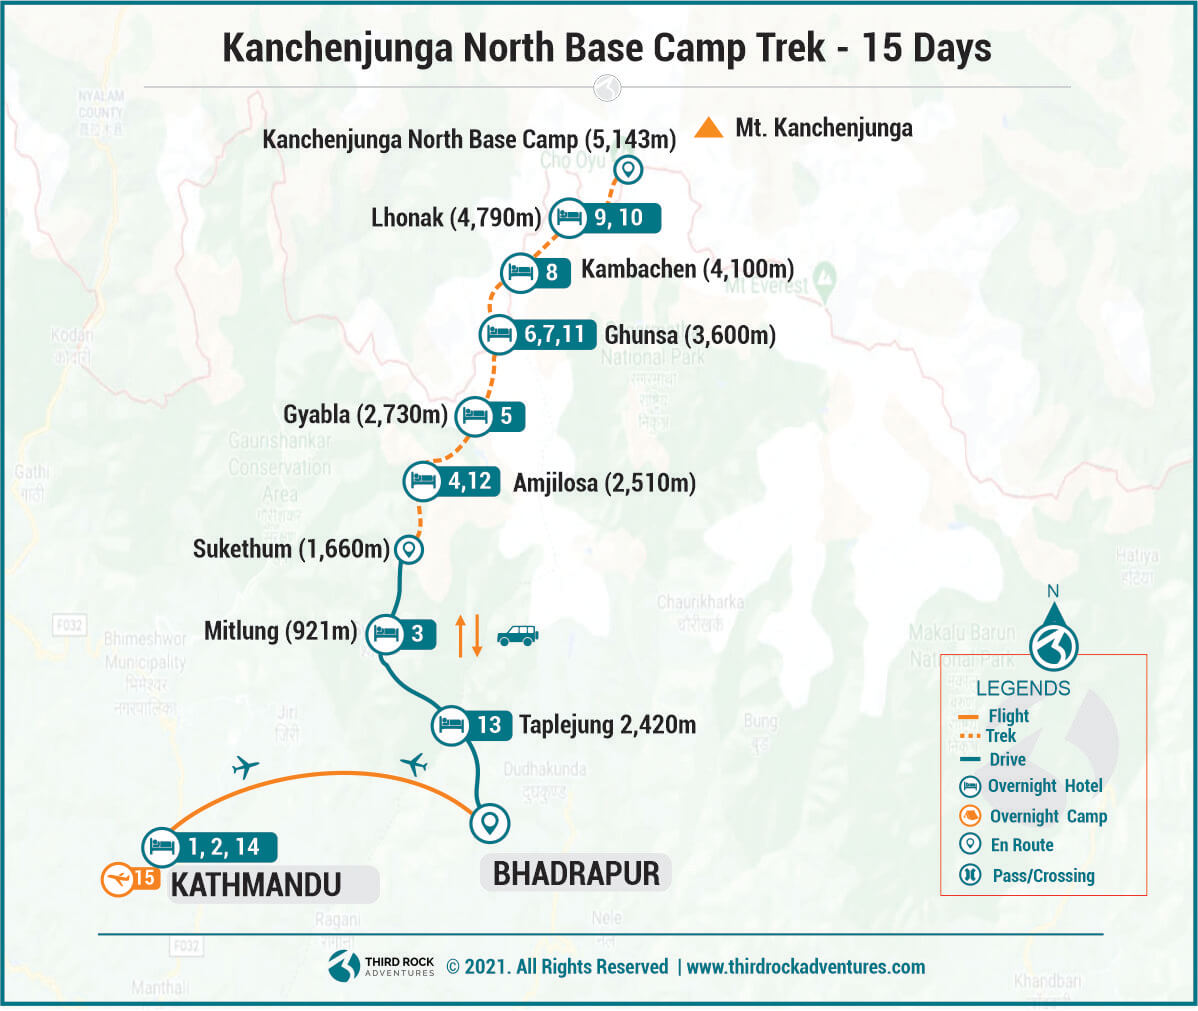 Route map for Kanchenjunga North Base Camp Trek